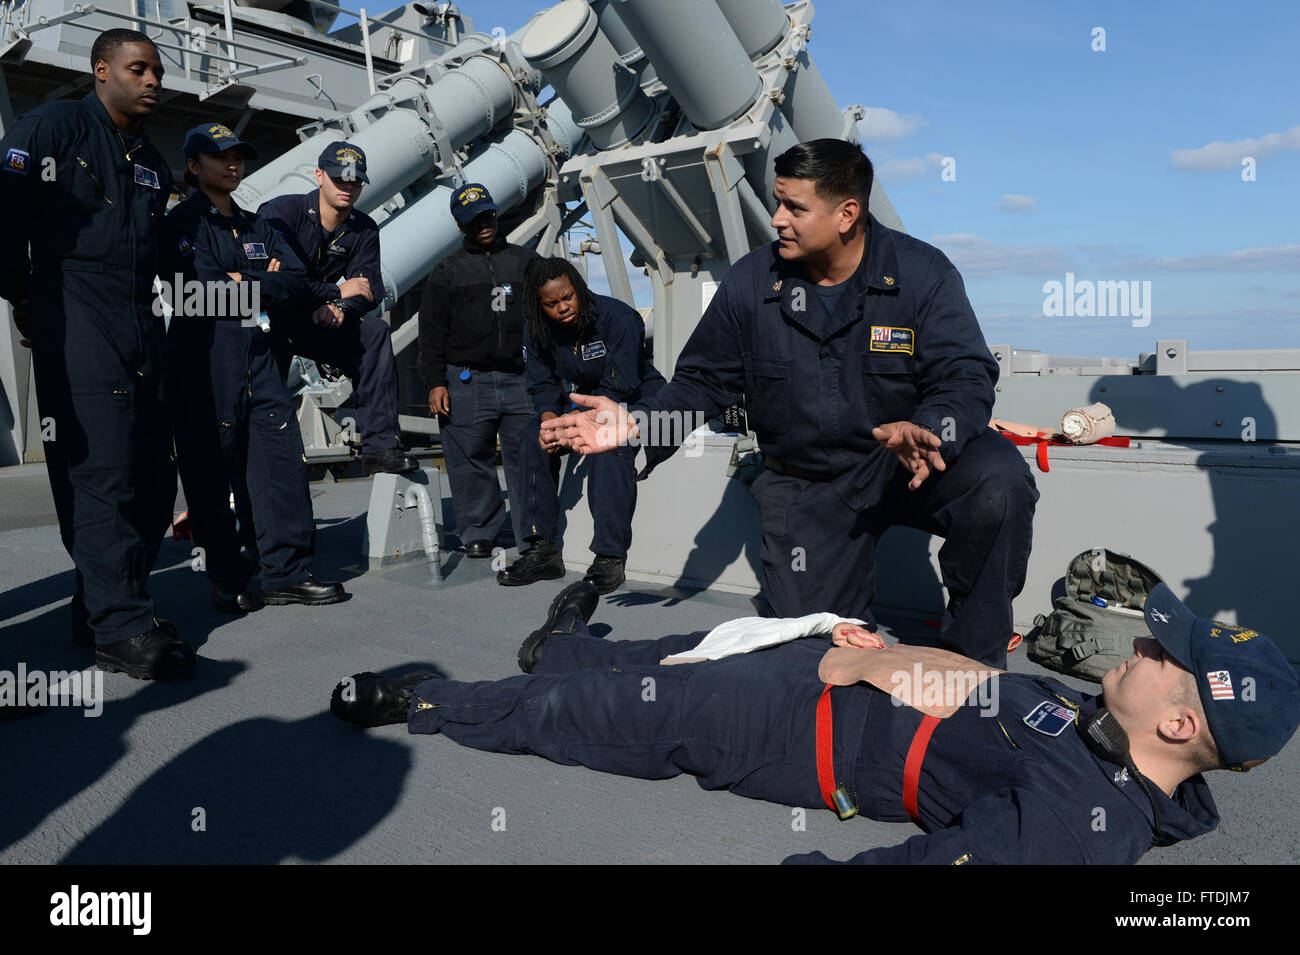 151209-N-FP878-381 MEDITERRANEAN SEA (Dec. 9, 2015) Senior Chief Hospital Corpsman Noel Martinez from San Diego, second from right, gives basic first aid training to Sailors aboard USS Carney (DDG 64) Dec. 9, 2015. Carney, an Arleigh Burke-class guided-missile destroyer, forward deployed to Rota, Spain, is conducting a routine patrol in the U. S. 6th Fleet area of operations in support of U.S. national security interests in Europe. (U.S. Navy photo by Mass Communication Specialist 1st Class Theron J. Godbold/Released) Stock Photo